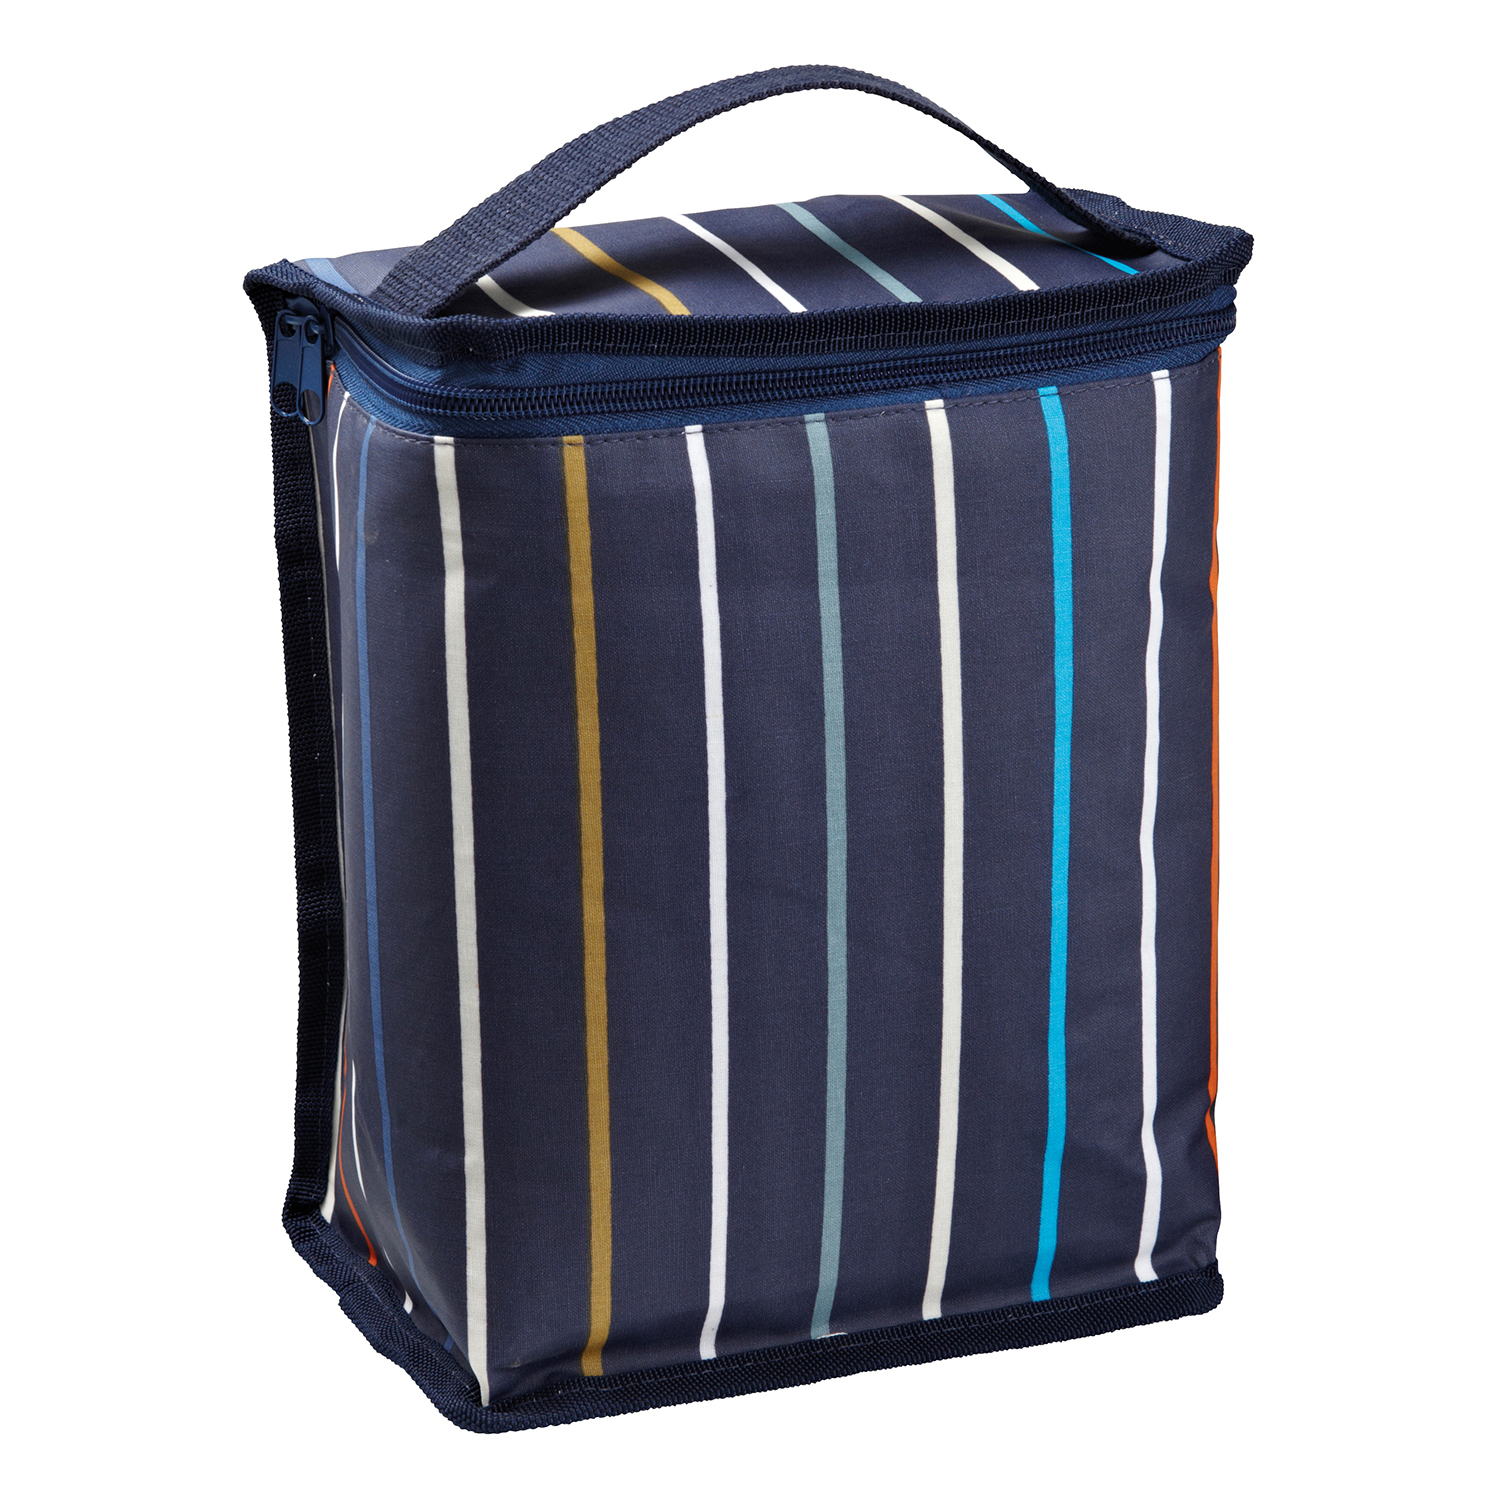 Soft Insulated Lunch Bag Lunch Bag, Upright Stripes